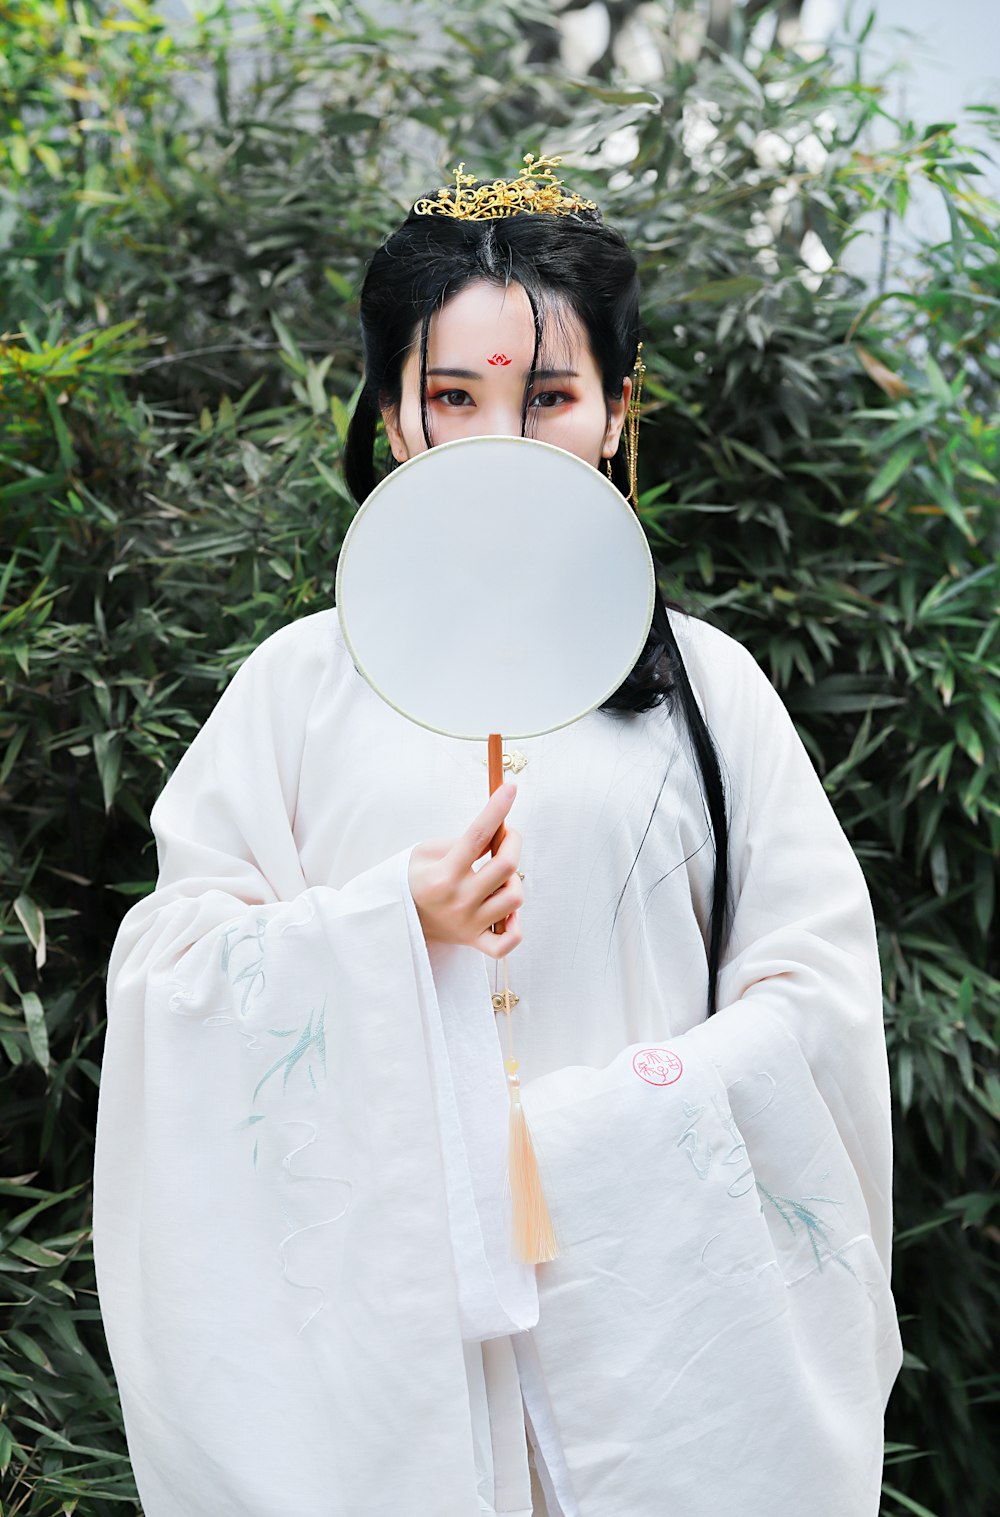 woman wearing kimono costume standing and covering her face using handfan